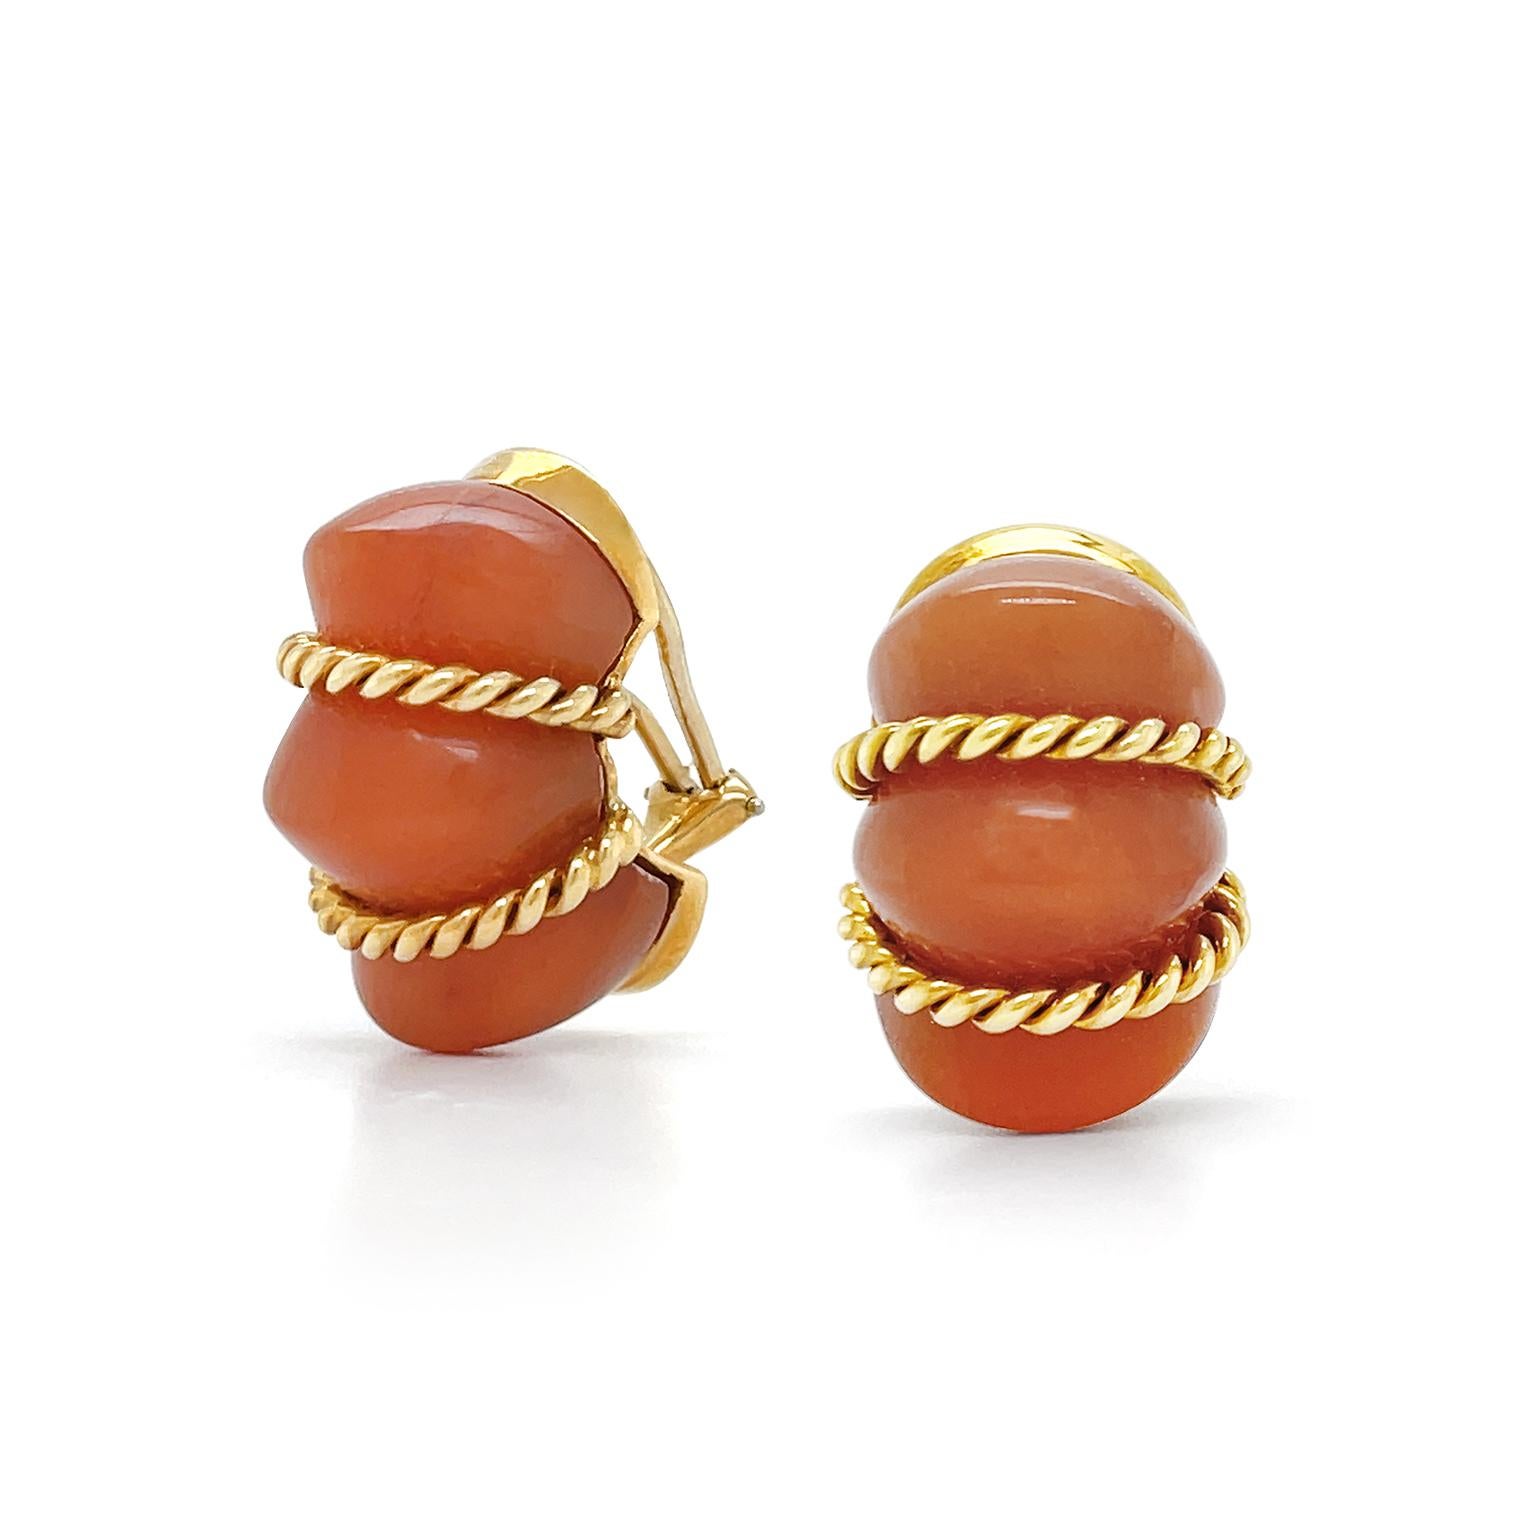 The treasured translucency of pink aventurine is the focus of these earrings. Carved into a trio of raised mounds, the design resembles a shrimp. 18k yellow gold braids rest in the dips of the carving to bring out the color of the aventurine. When